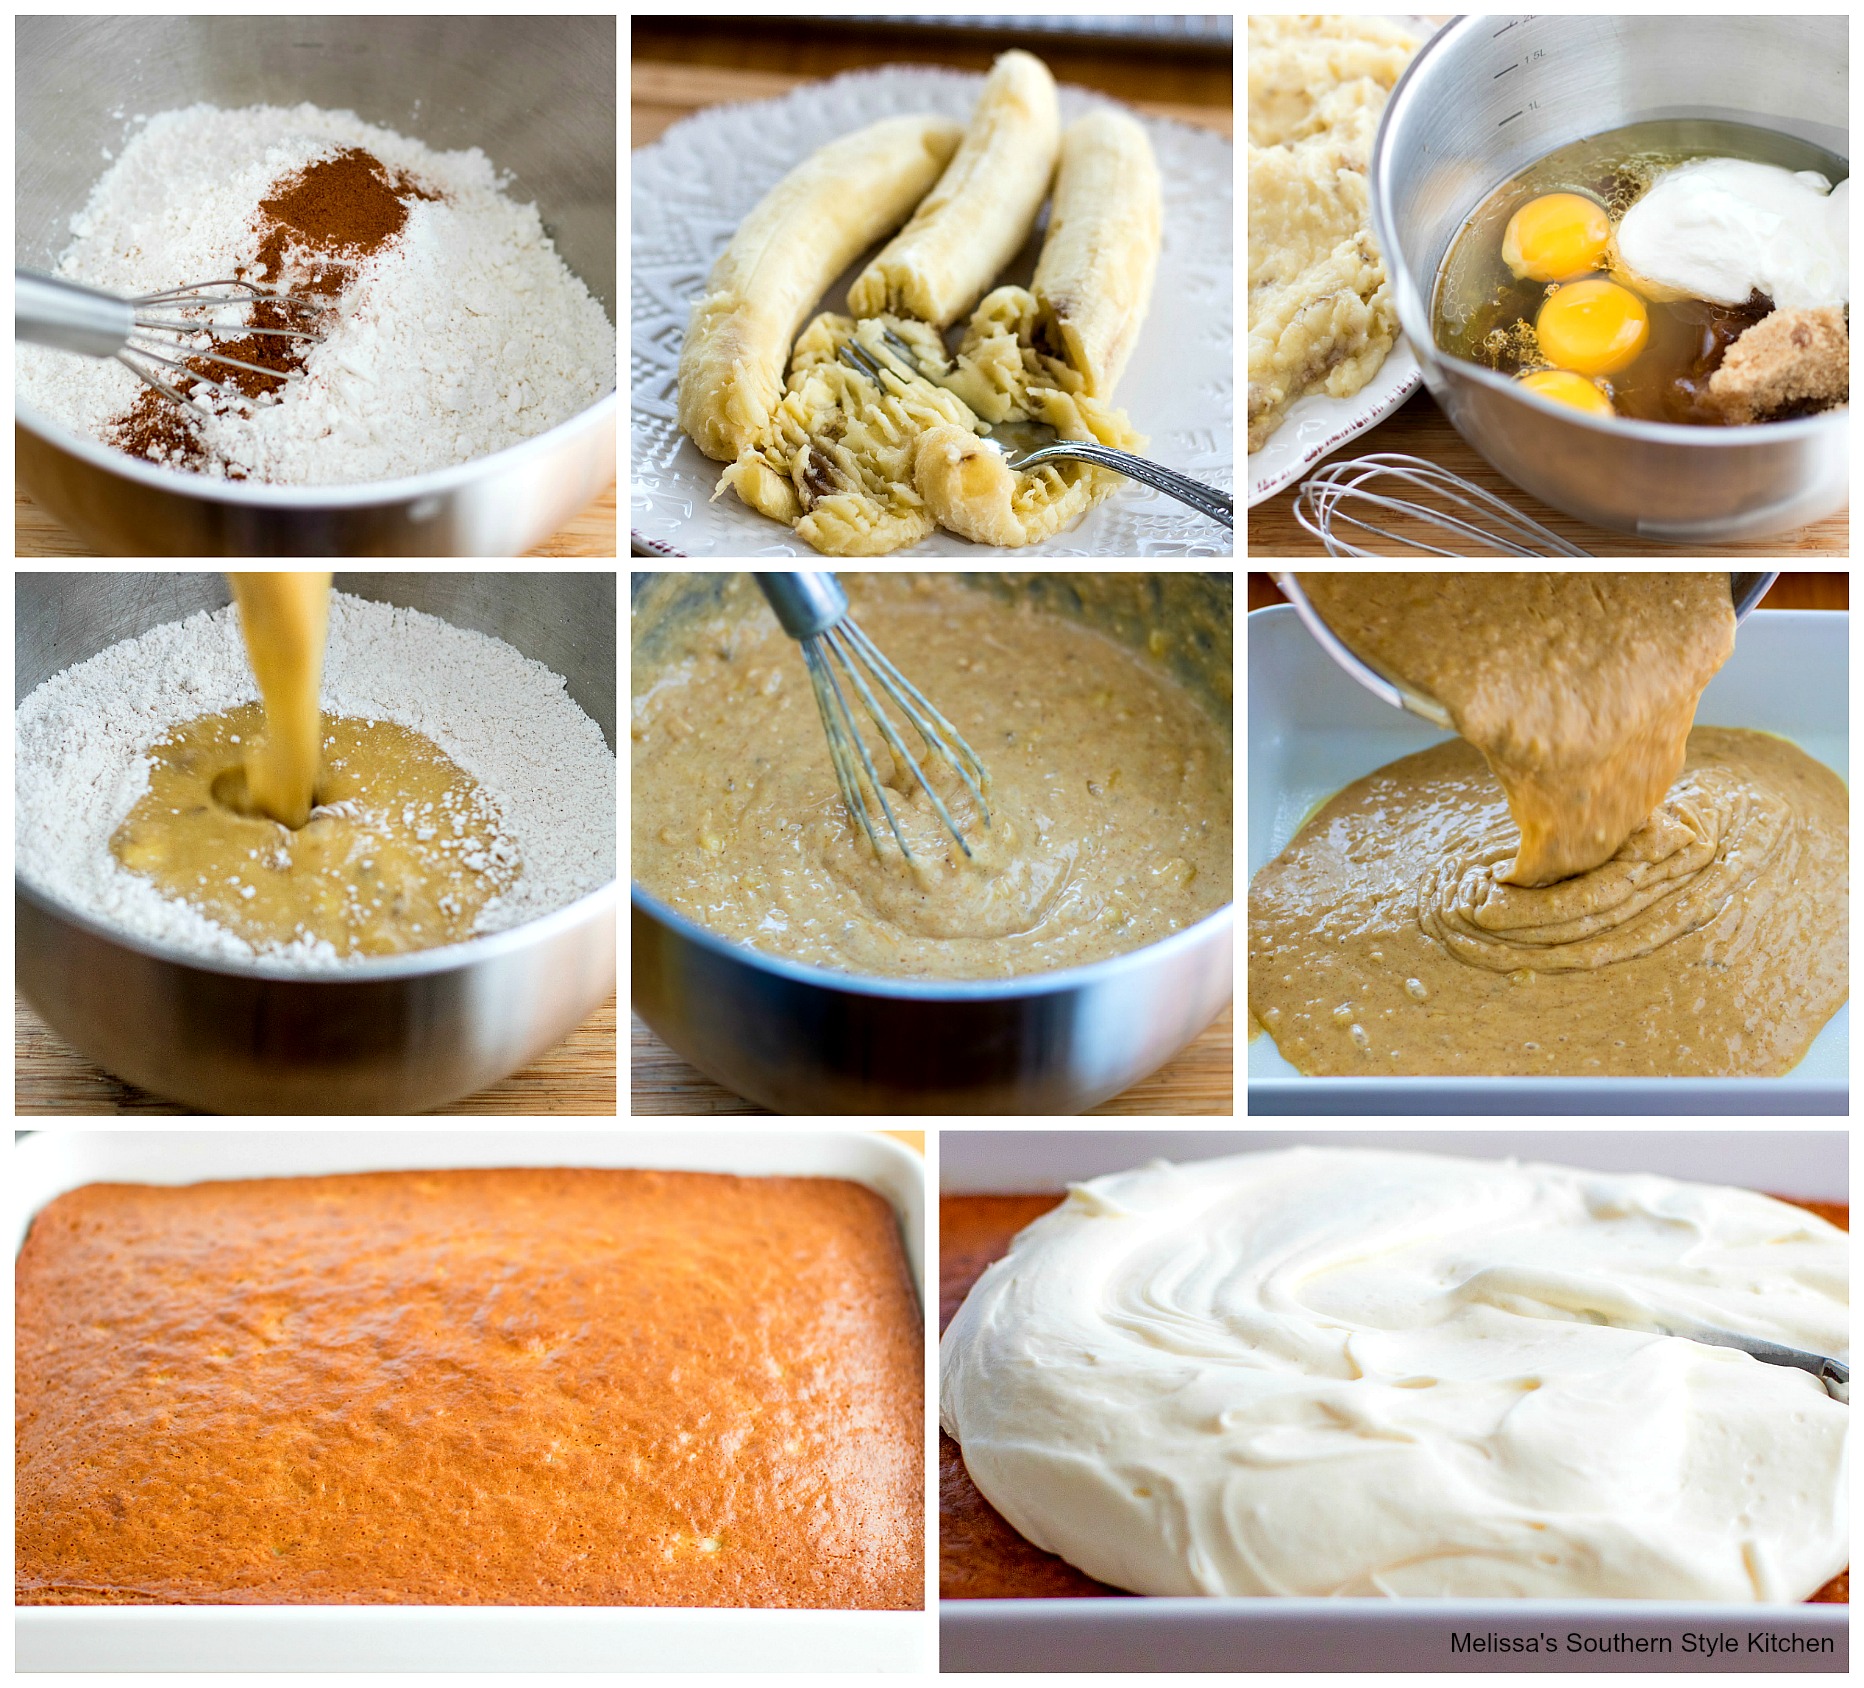 step-by-step images and ingredients to make banana cake